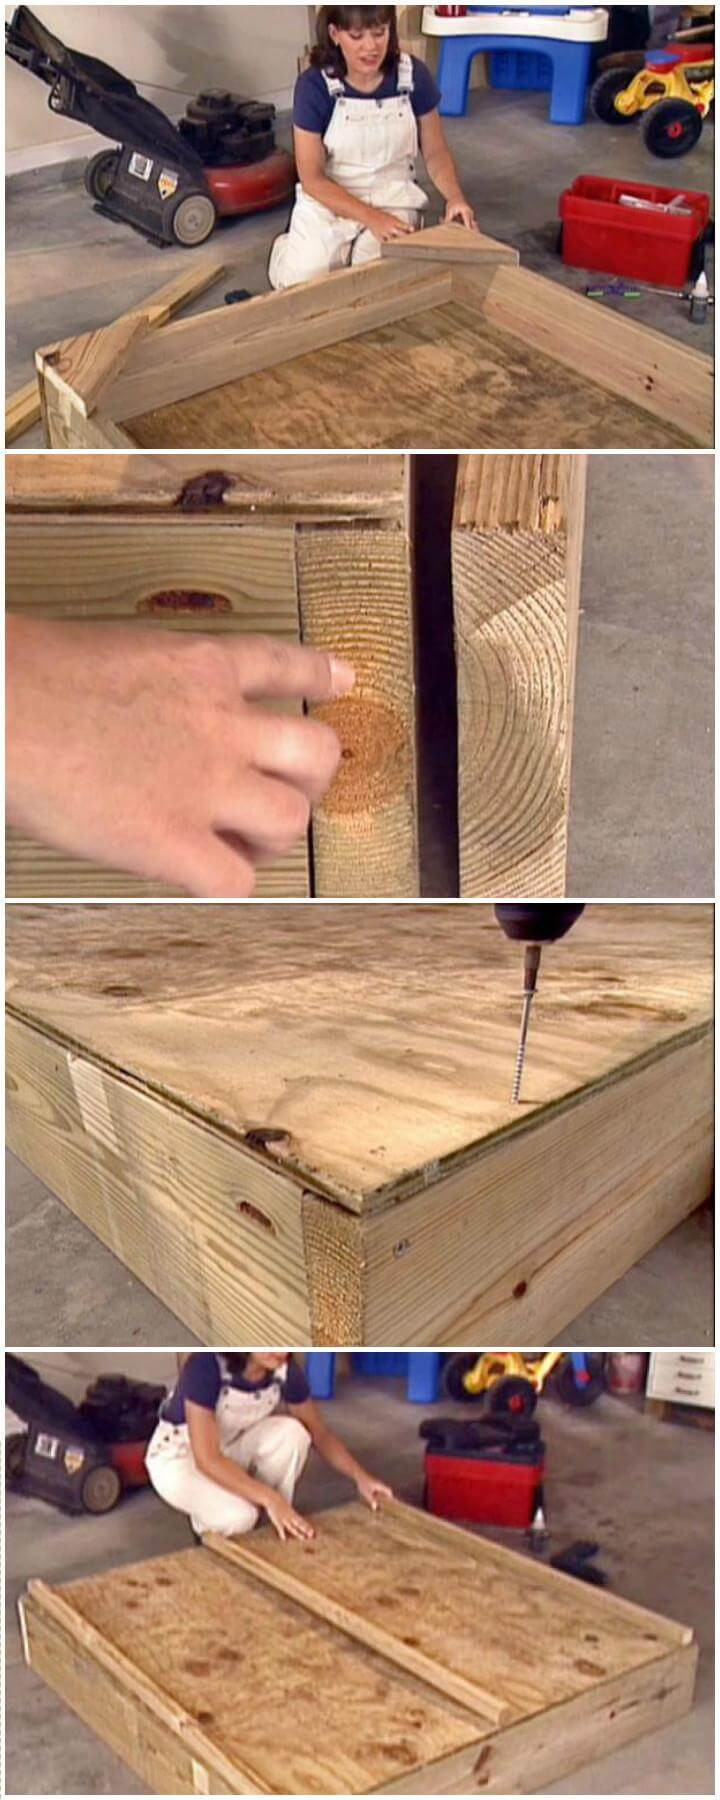 DIY Wooden Sandbox
 60 DIY Sandbox Ideas and Projects for Kids Page 10 of